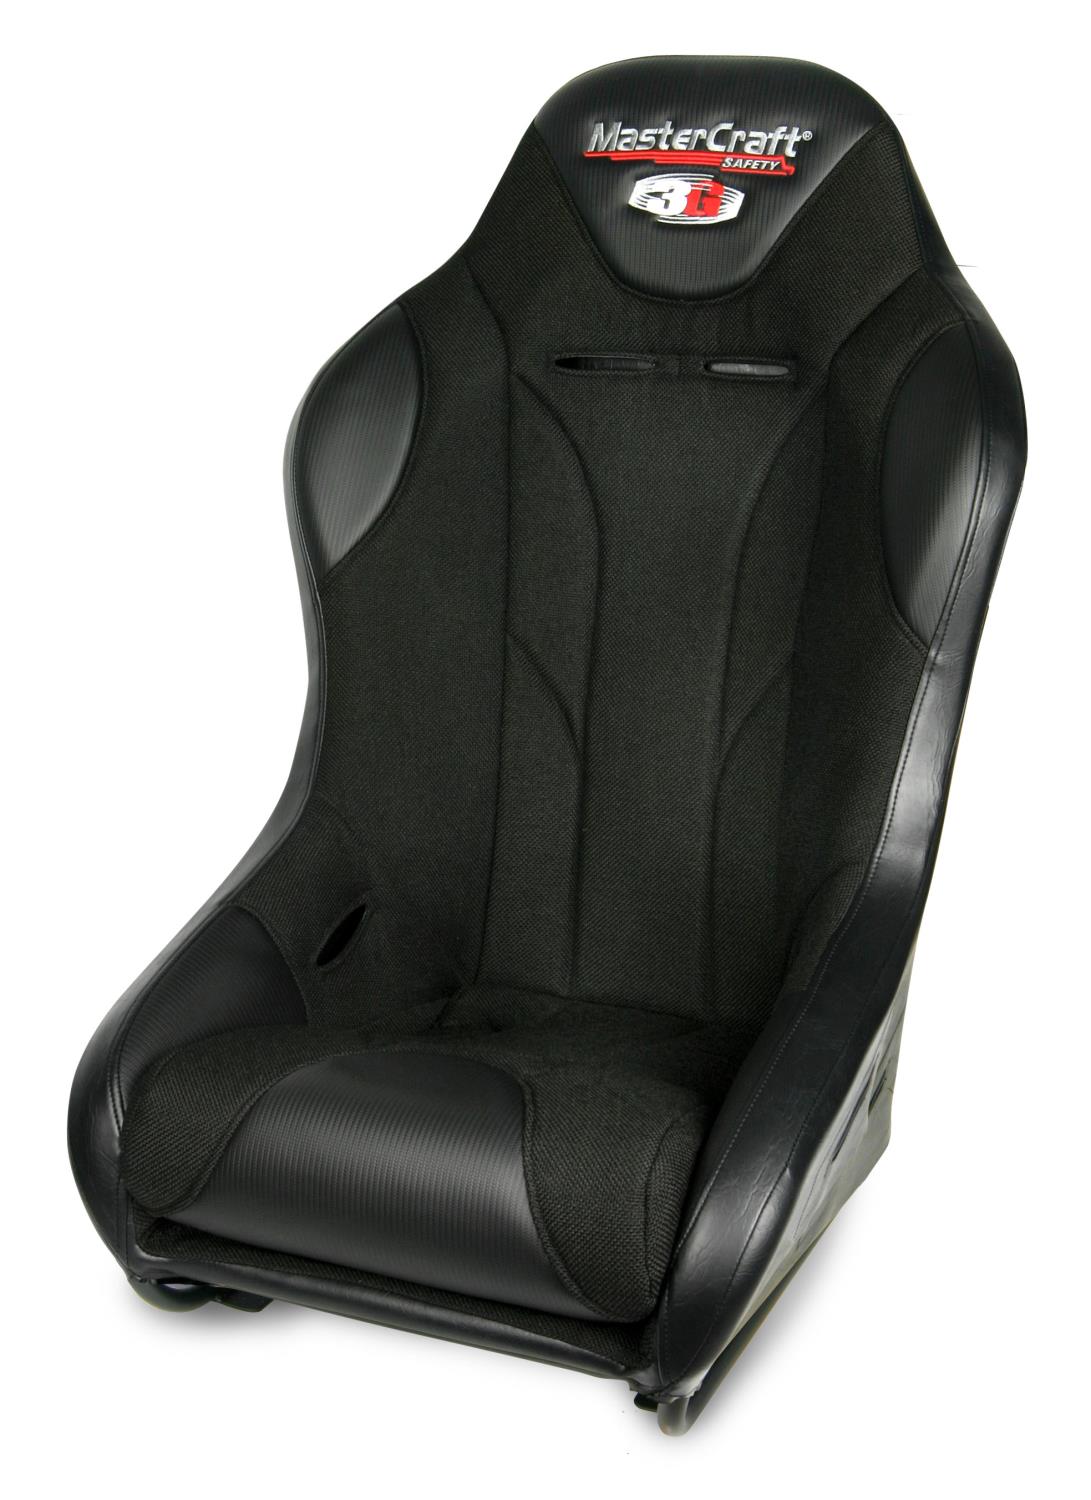 568034 2 in. WIDER 3G Seat w/DirtSport Stitch Pattern, Black with Black Fabric Center and Side Panels, Black Band